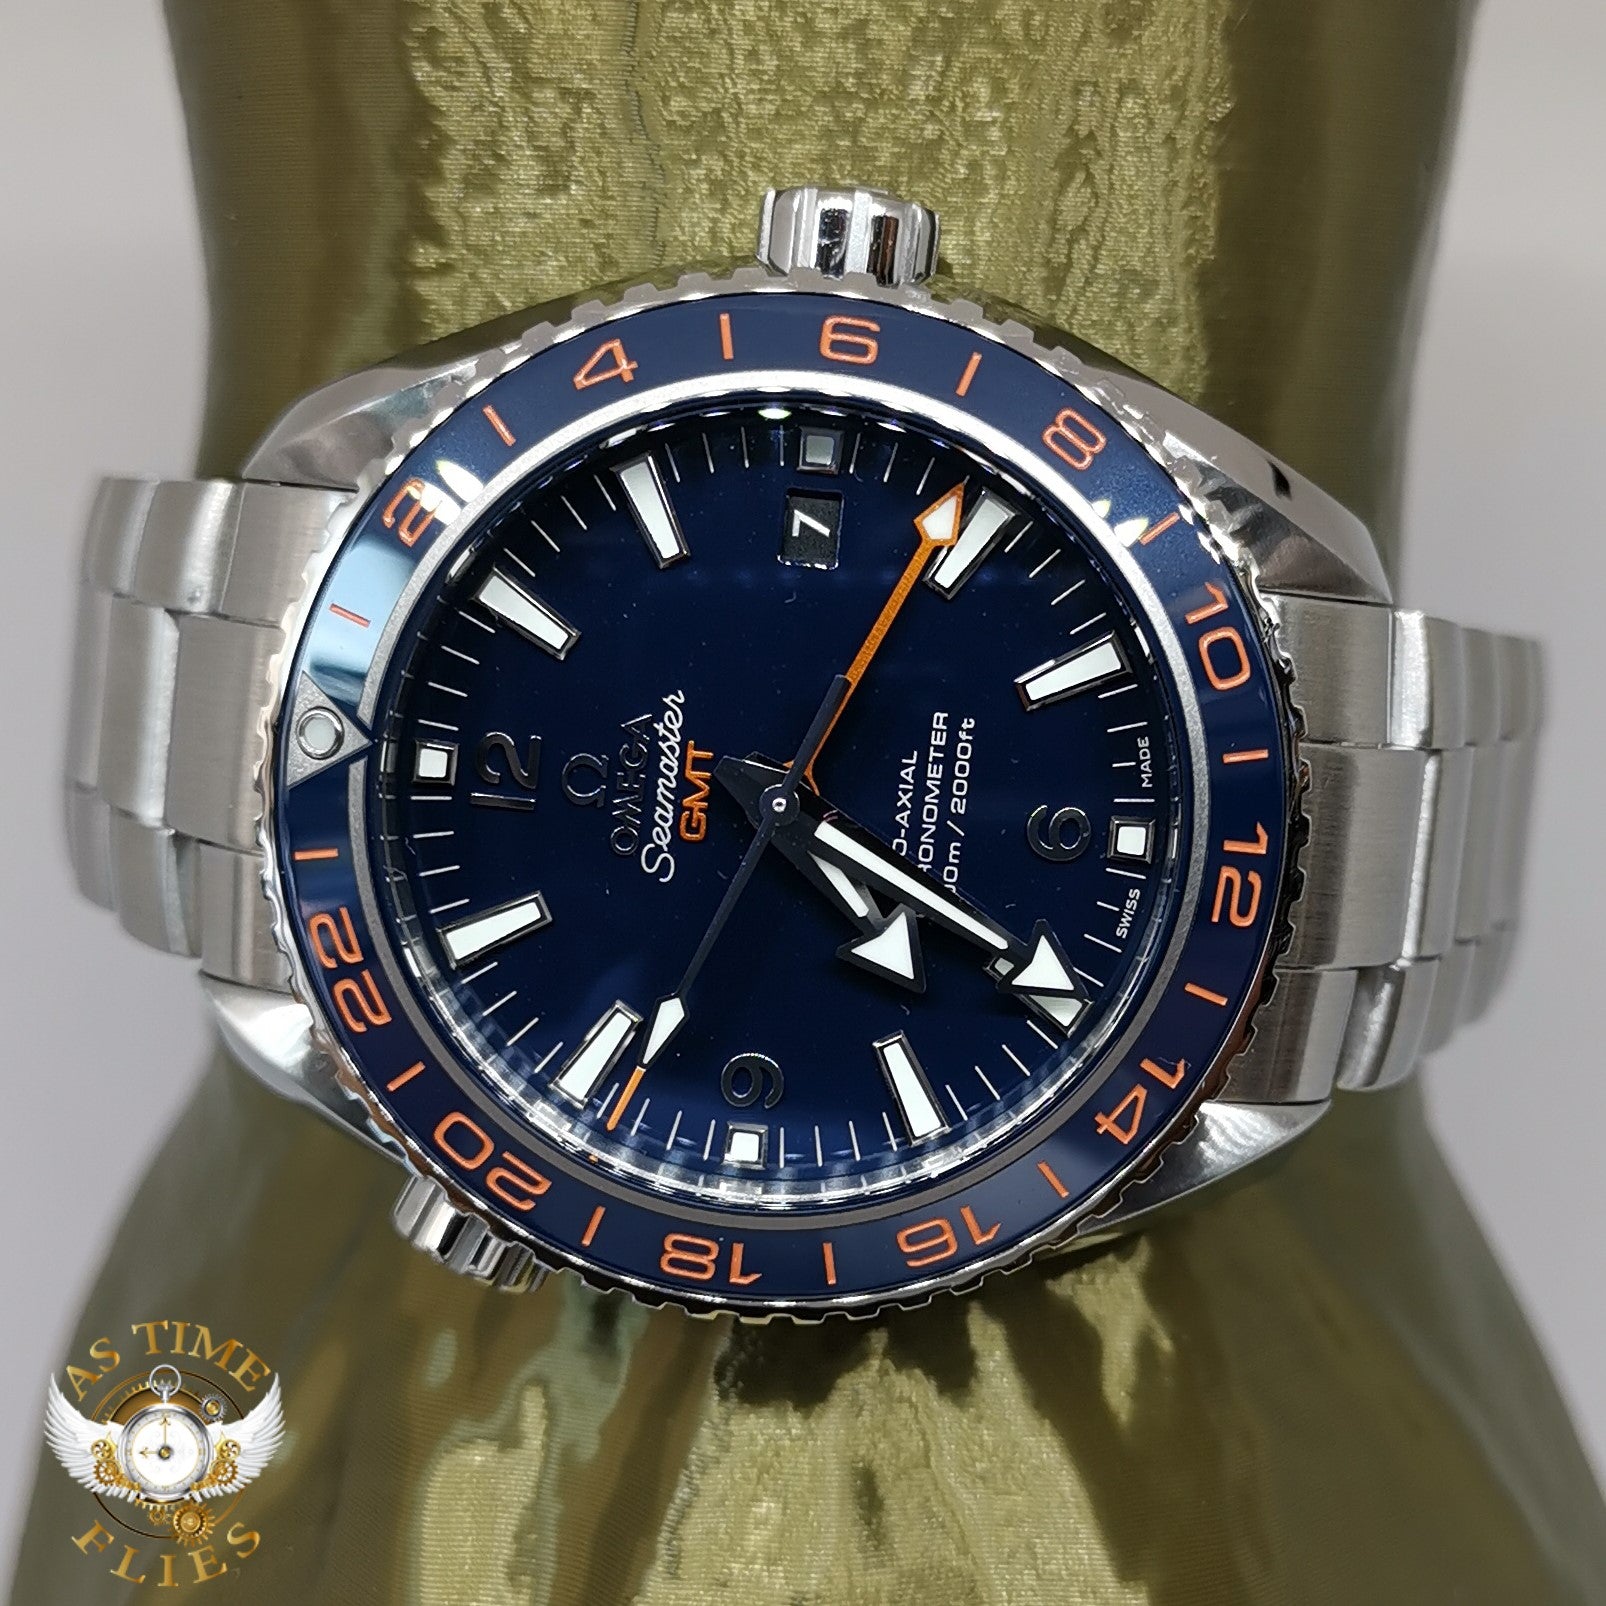 Omega Planet Ocean GMT "Good Planet" Ref. 232.30.44.22.03.001 BNIB box/papers/stickered